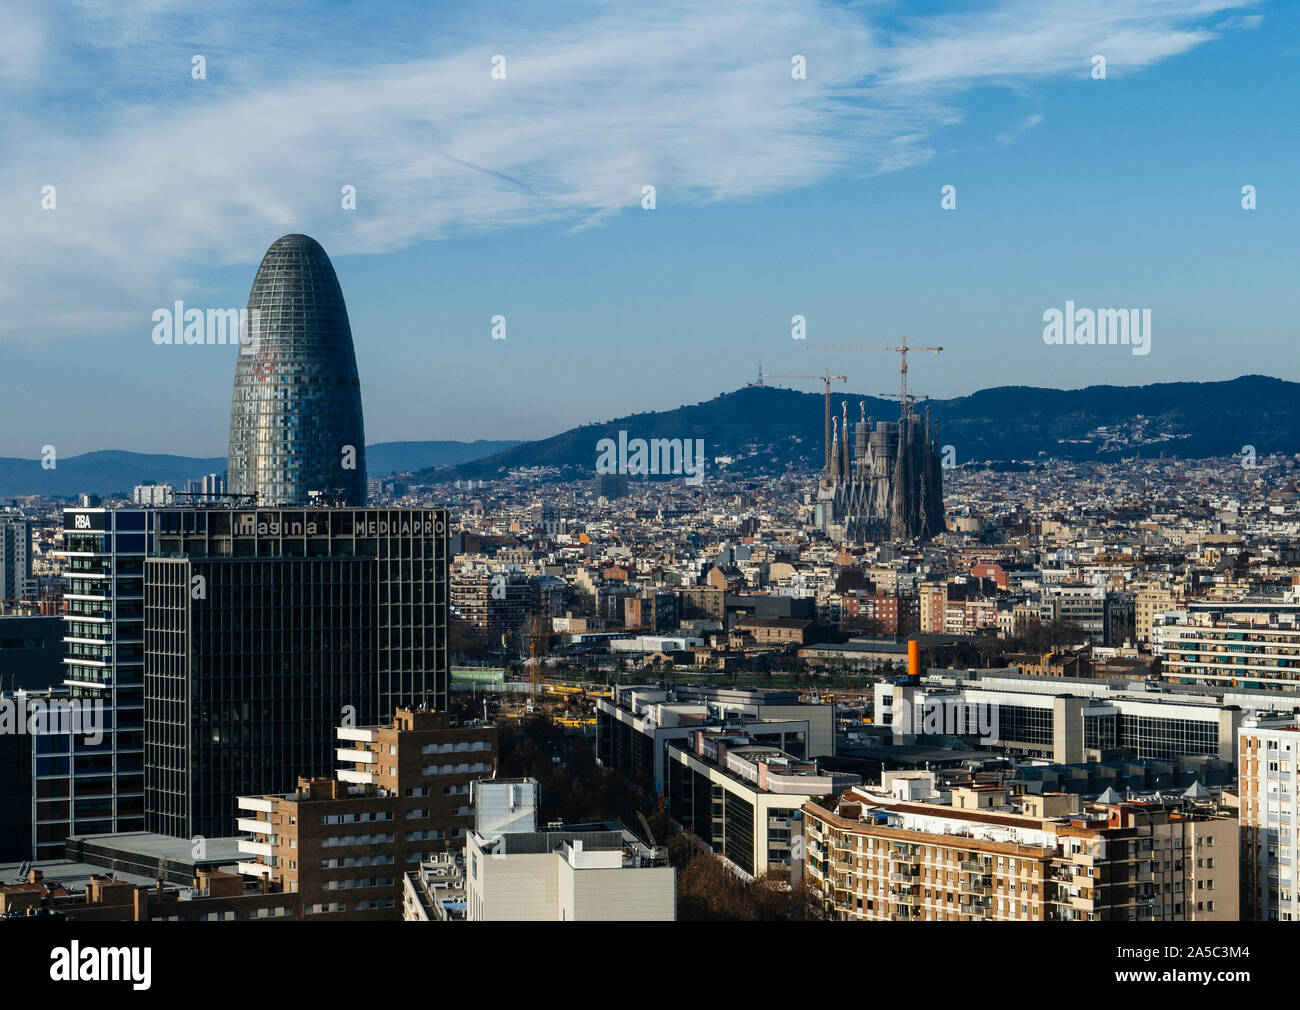 Cityscape with famous landmarks Torre Glories and La Sagrada Familia  towering above the city of Barcelona, Catalonia, Spain Stock Photo